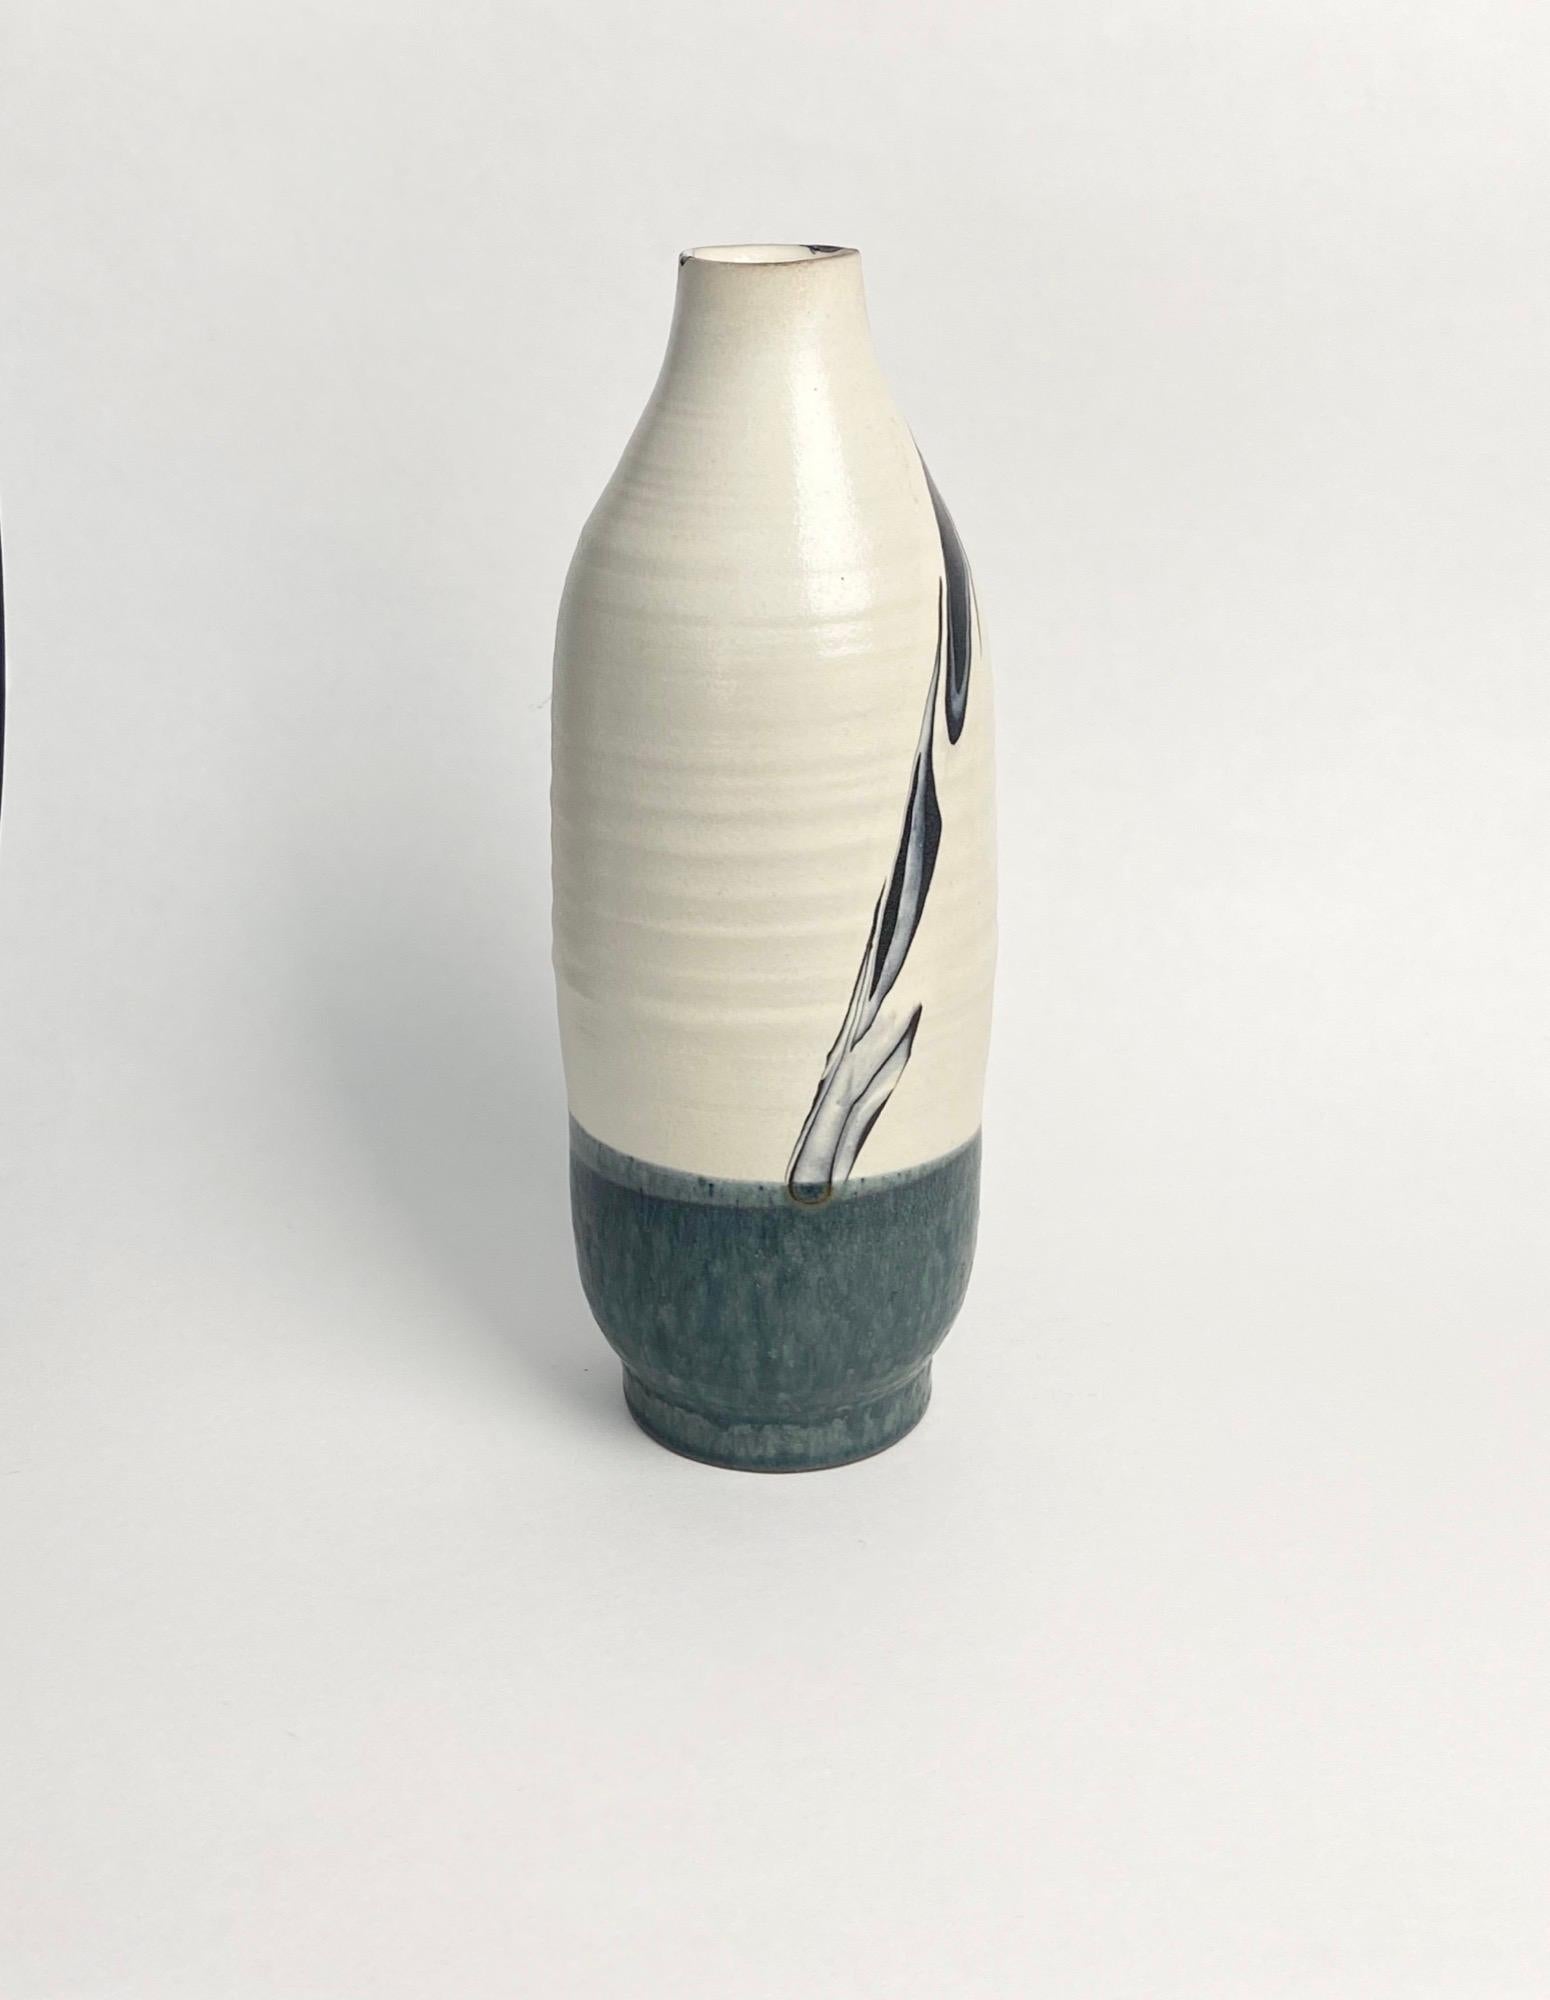 KONDO YUTAKA (1932-1983)
Blue and White Bottle, c.1960
Stoneware, blue and white with gestural streak
11.875 x 4.25 inches
With artist signed tomobako

Kondo Yutaka was the son of Living National Treasure Kondo Yazuo. His father was well known for